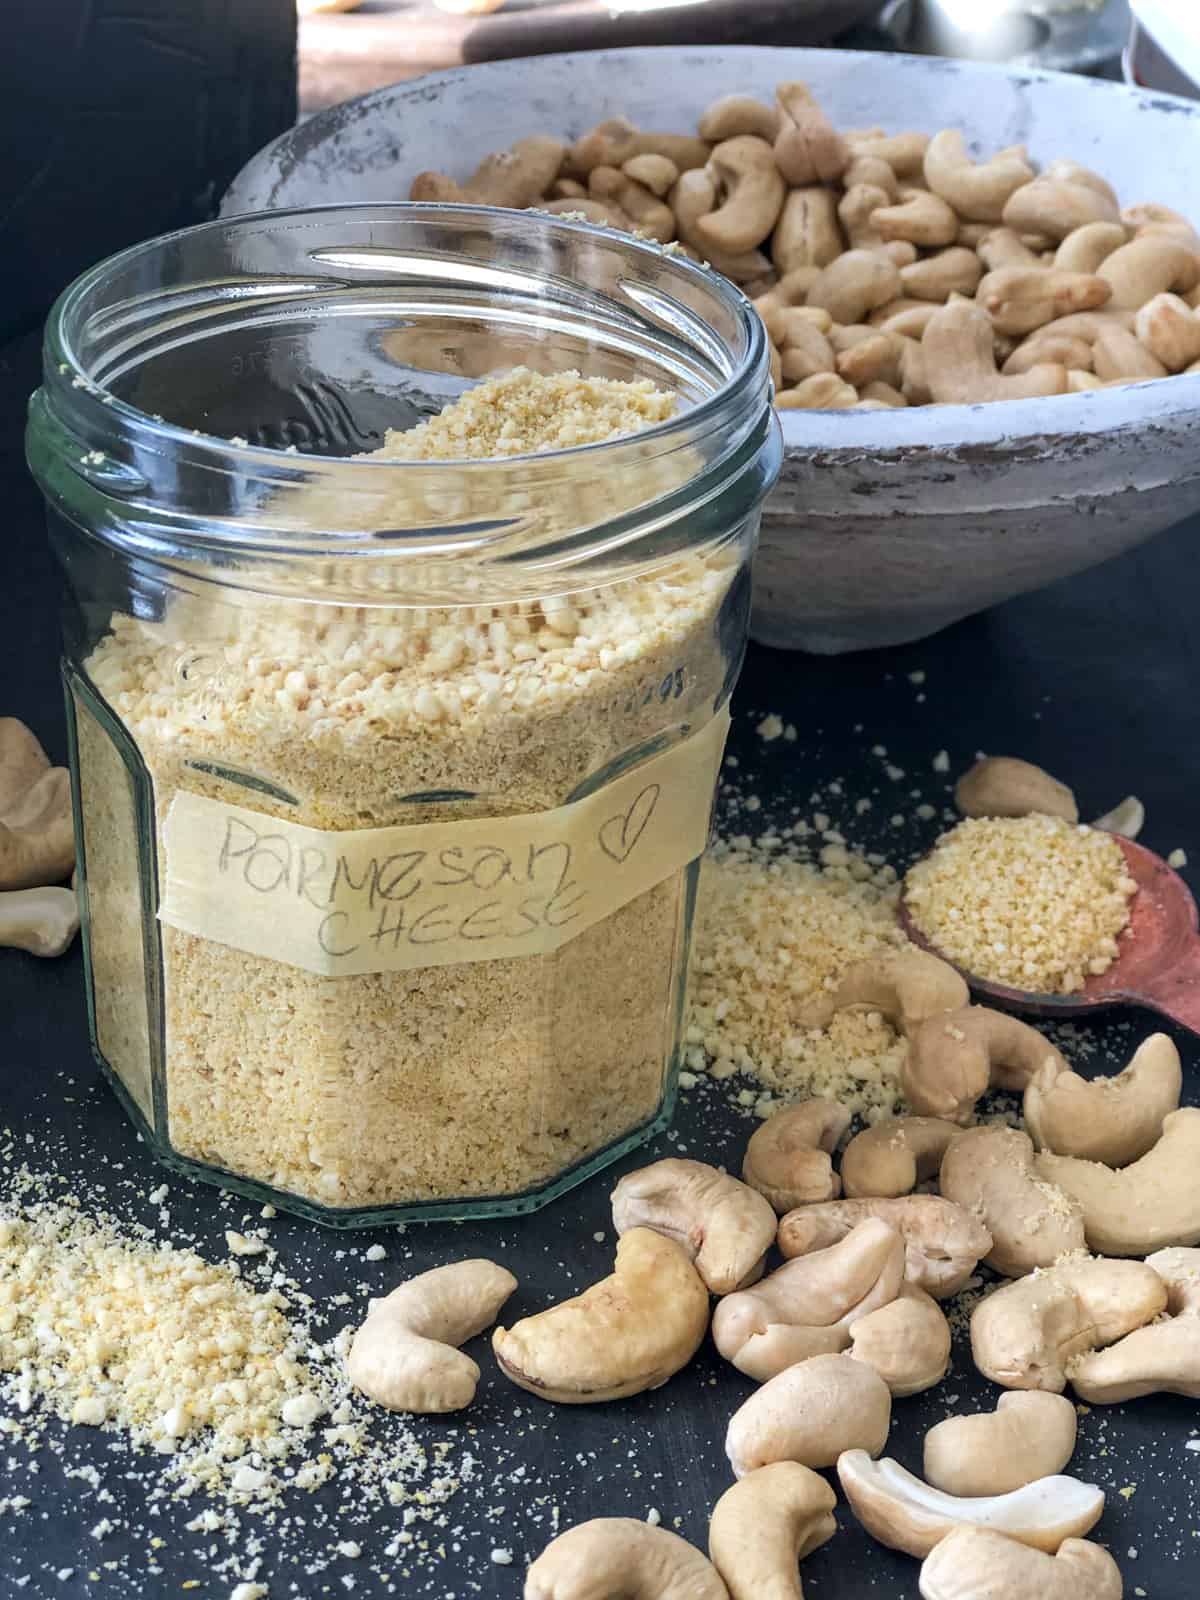 Jar of vegan parmesan cheese and bowlful of cashew nuts on tray.